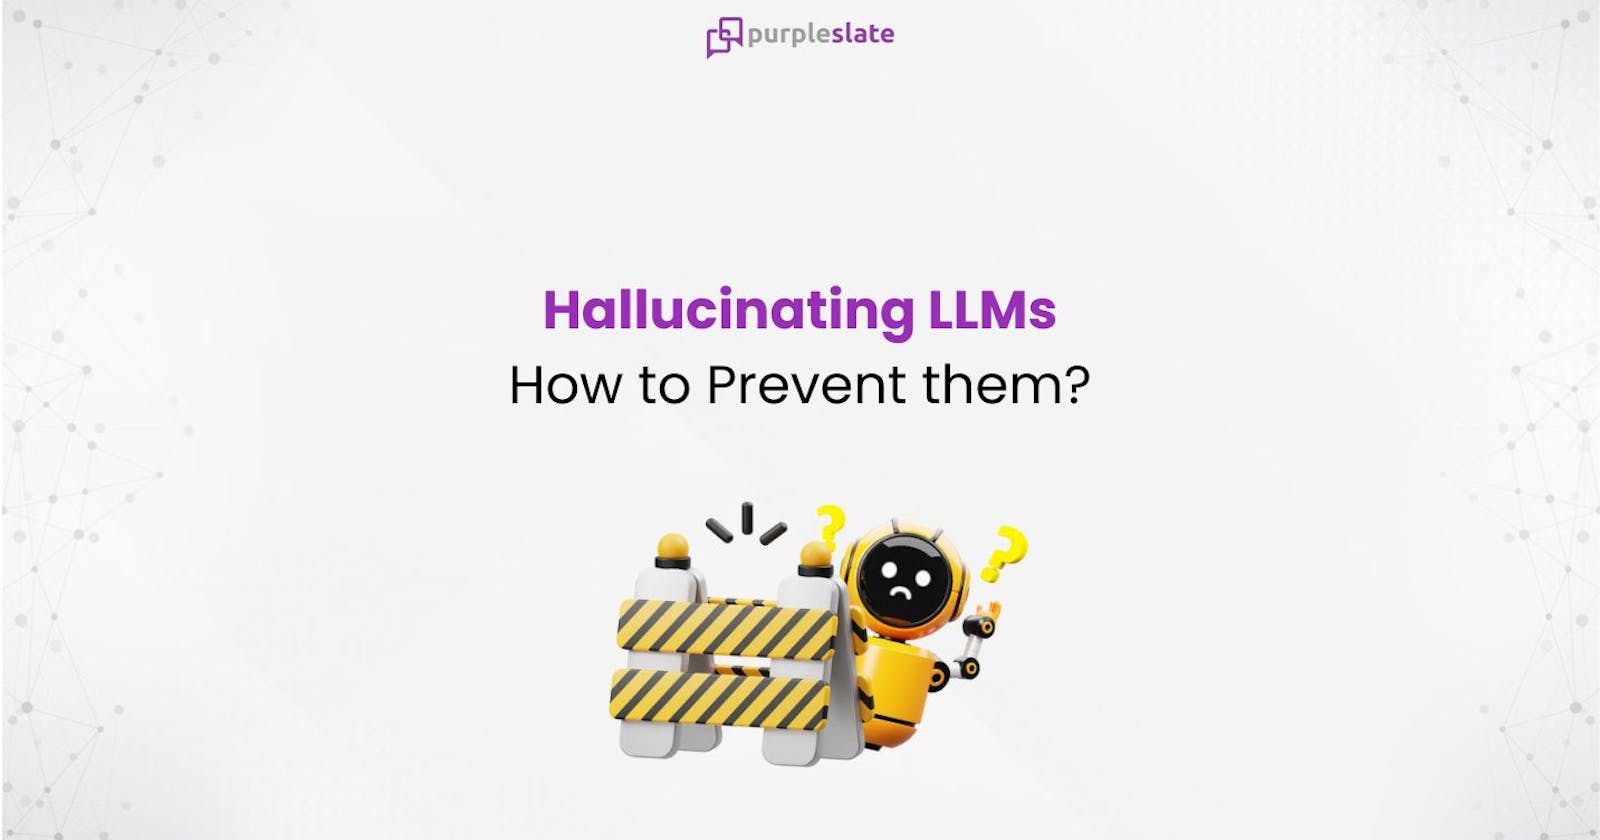 Hallucinating LLMs — How to Prevent them?